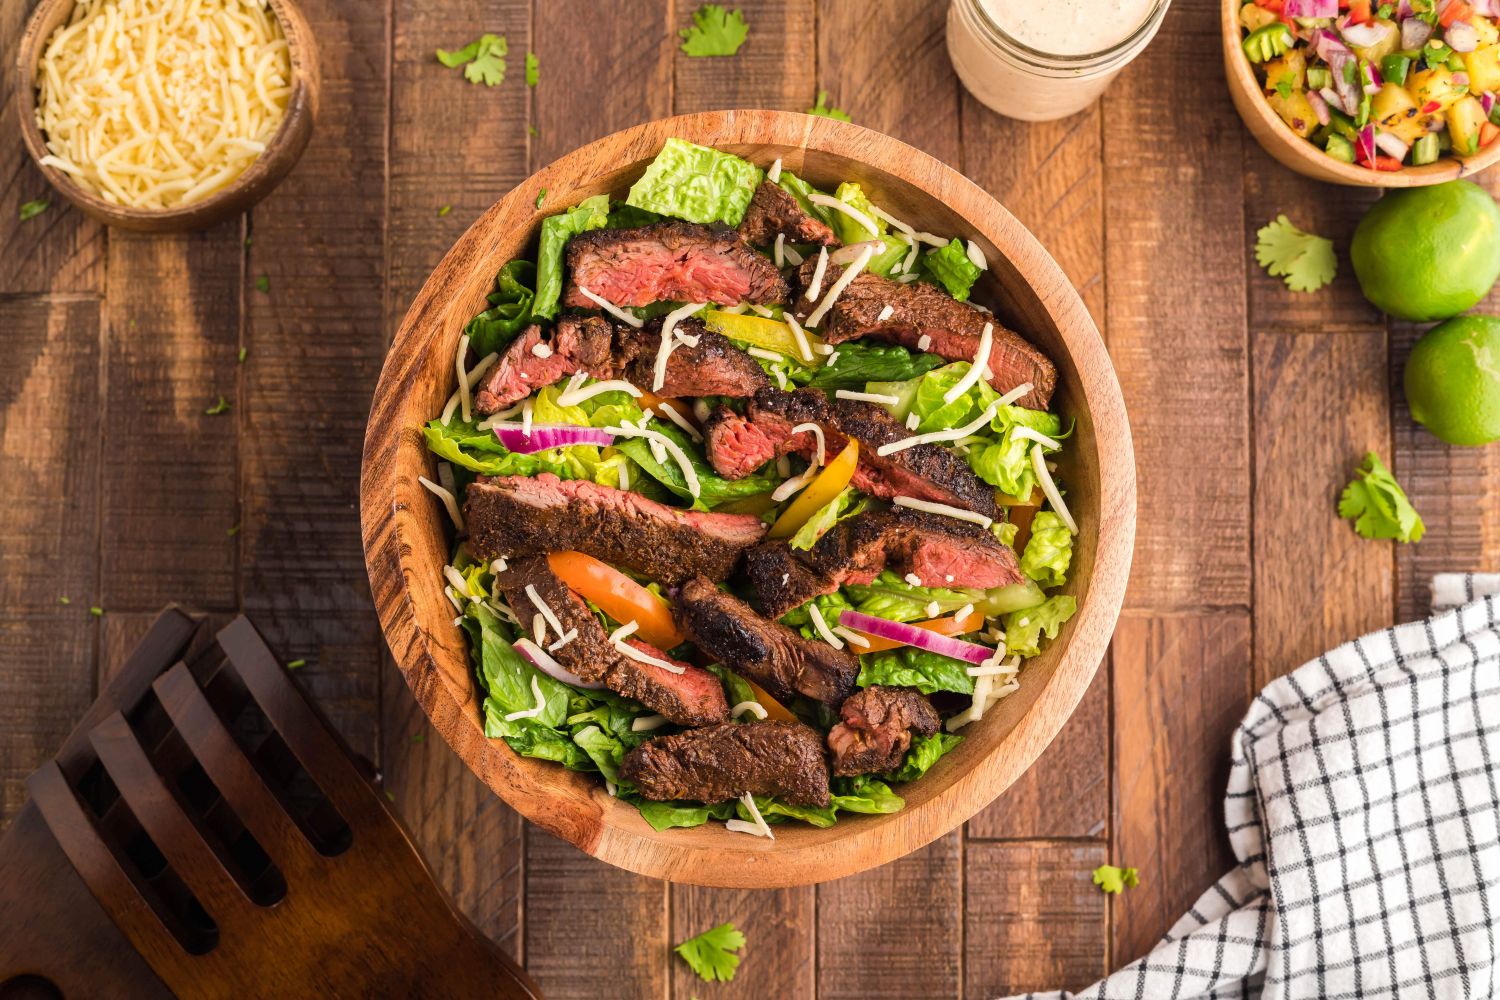 Blackened steak salad with thinly slcied steak over a bed of Romaine lettuce, red onion, peppers, and cheese.